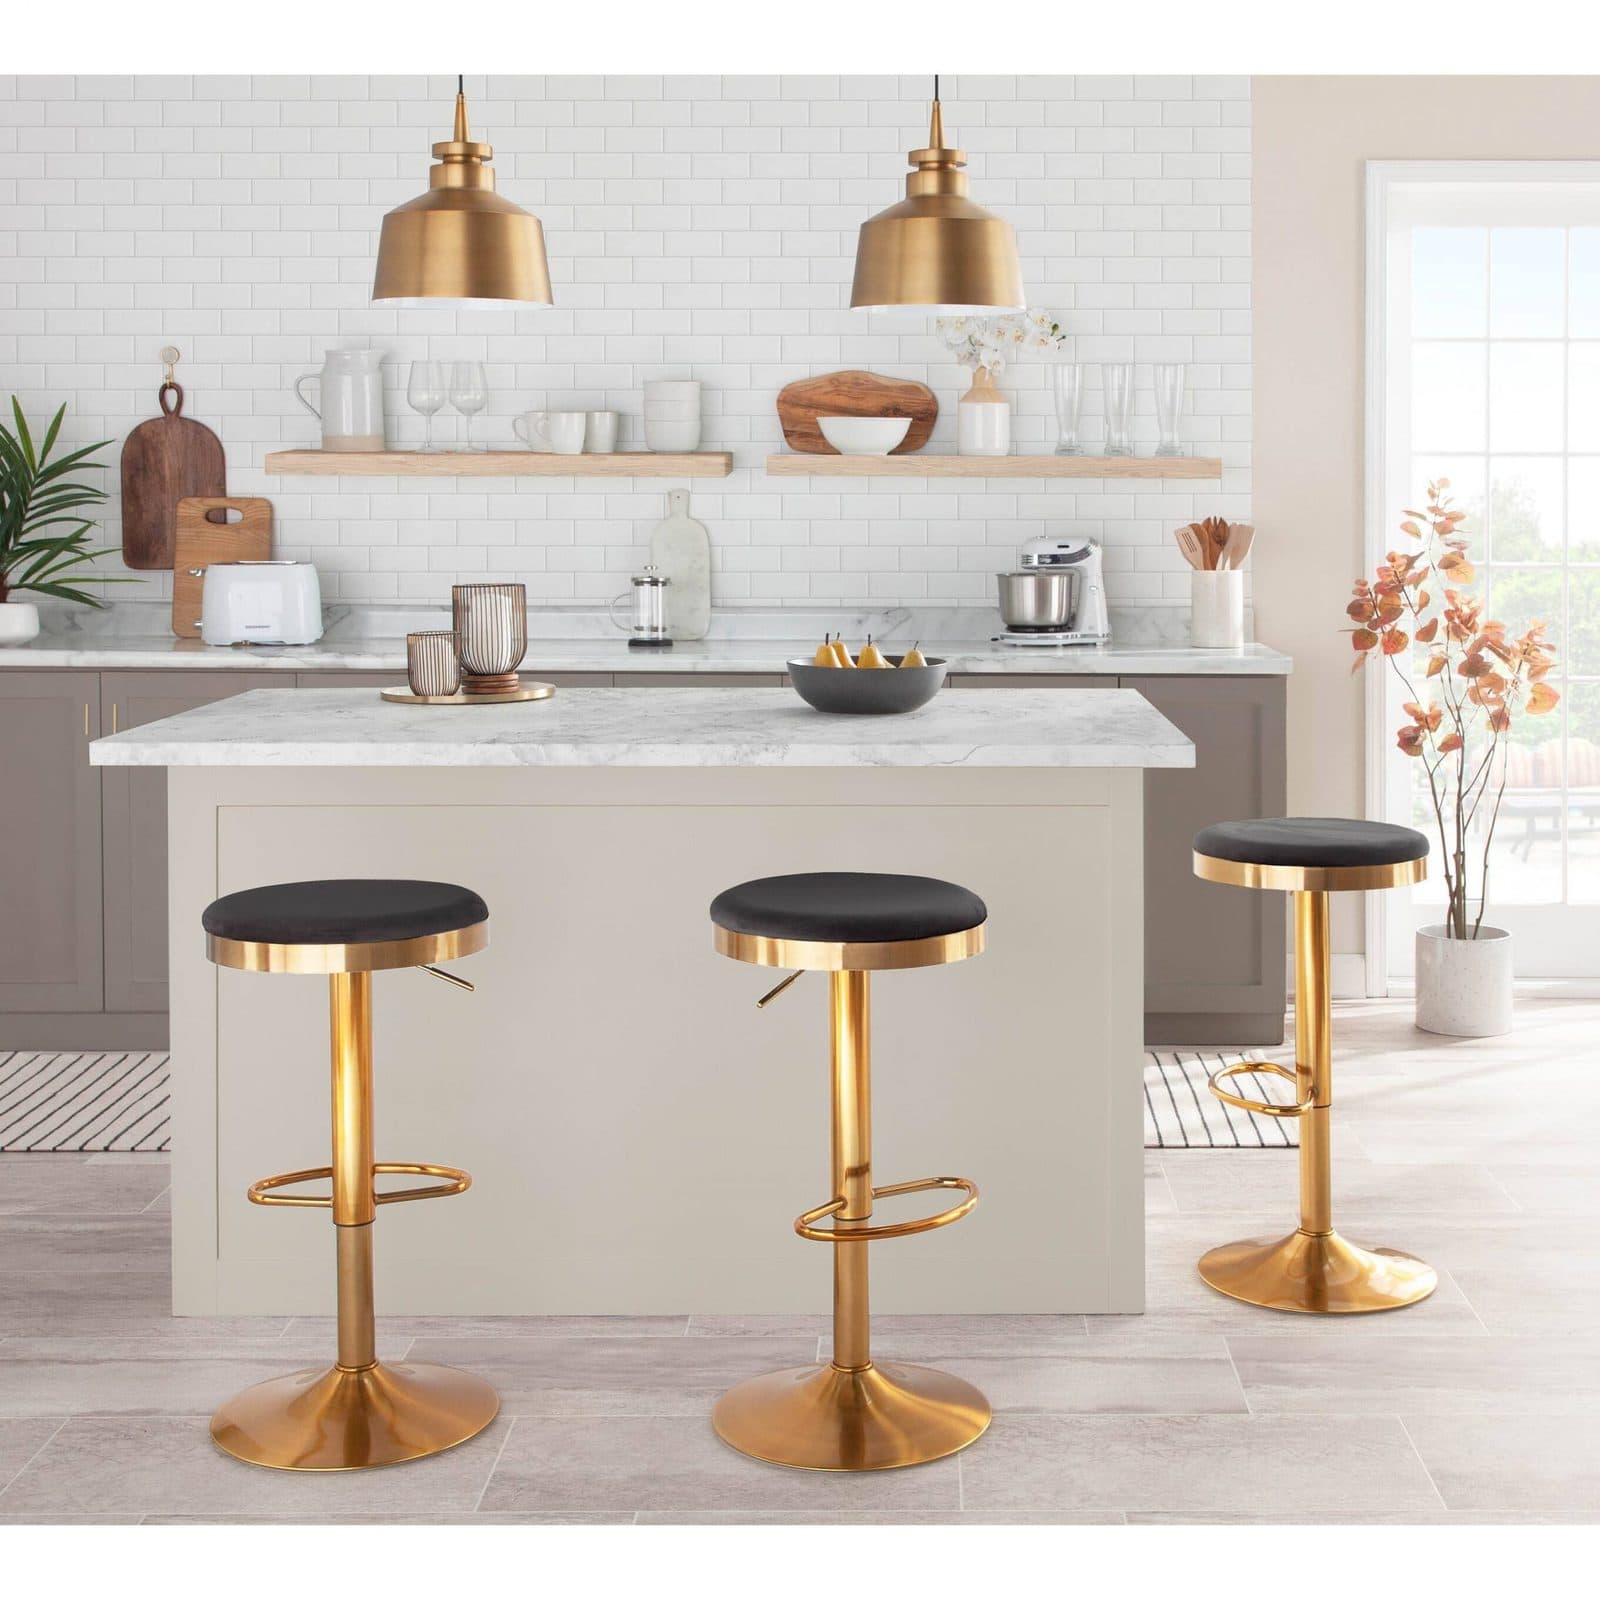 20 Best Stools for Kitchen Island